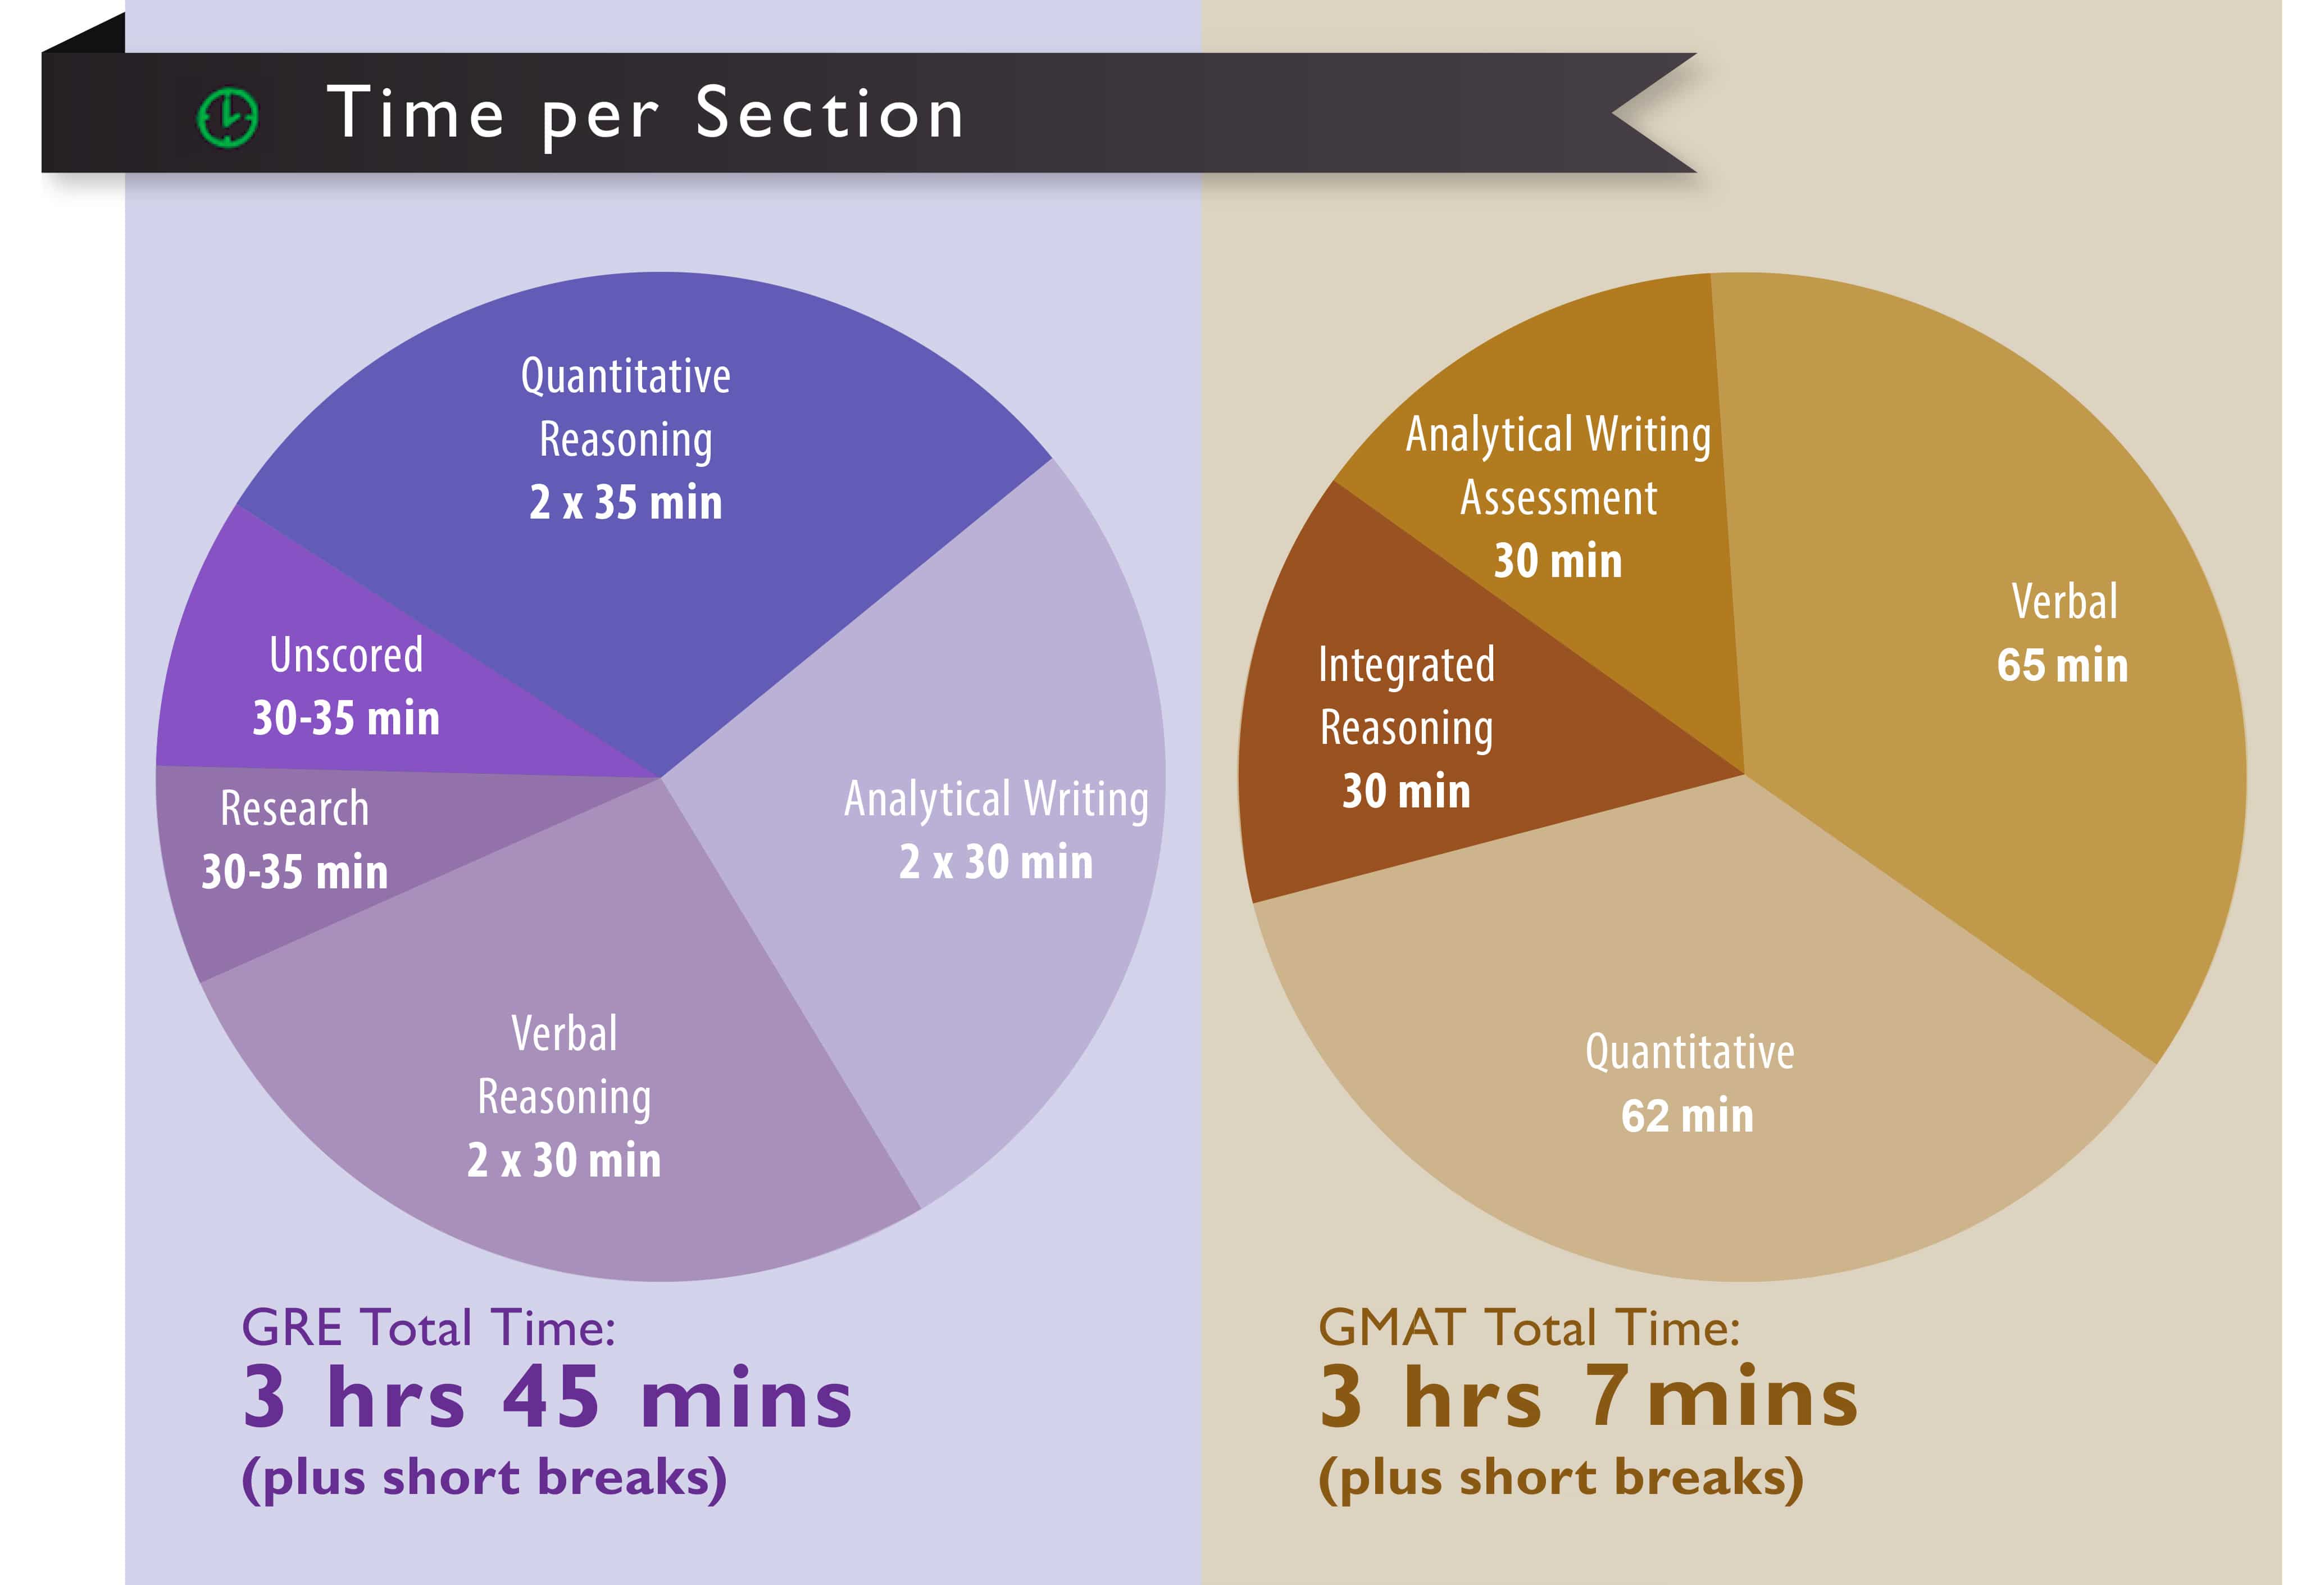 GMAT vs GRE timing - infographic by Magoosh